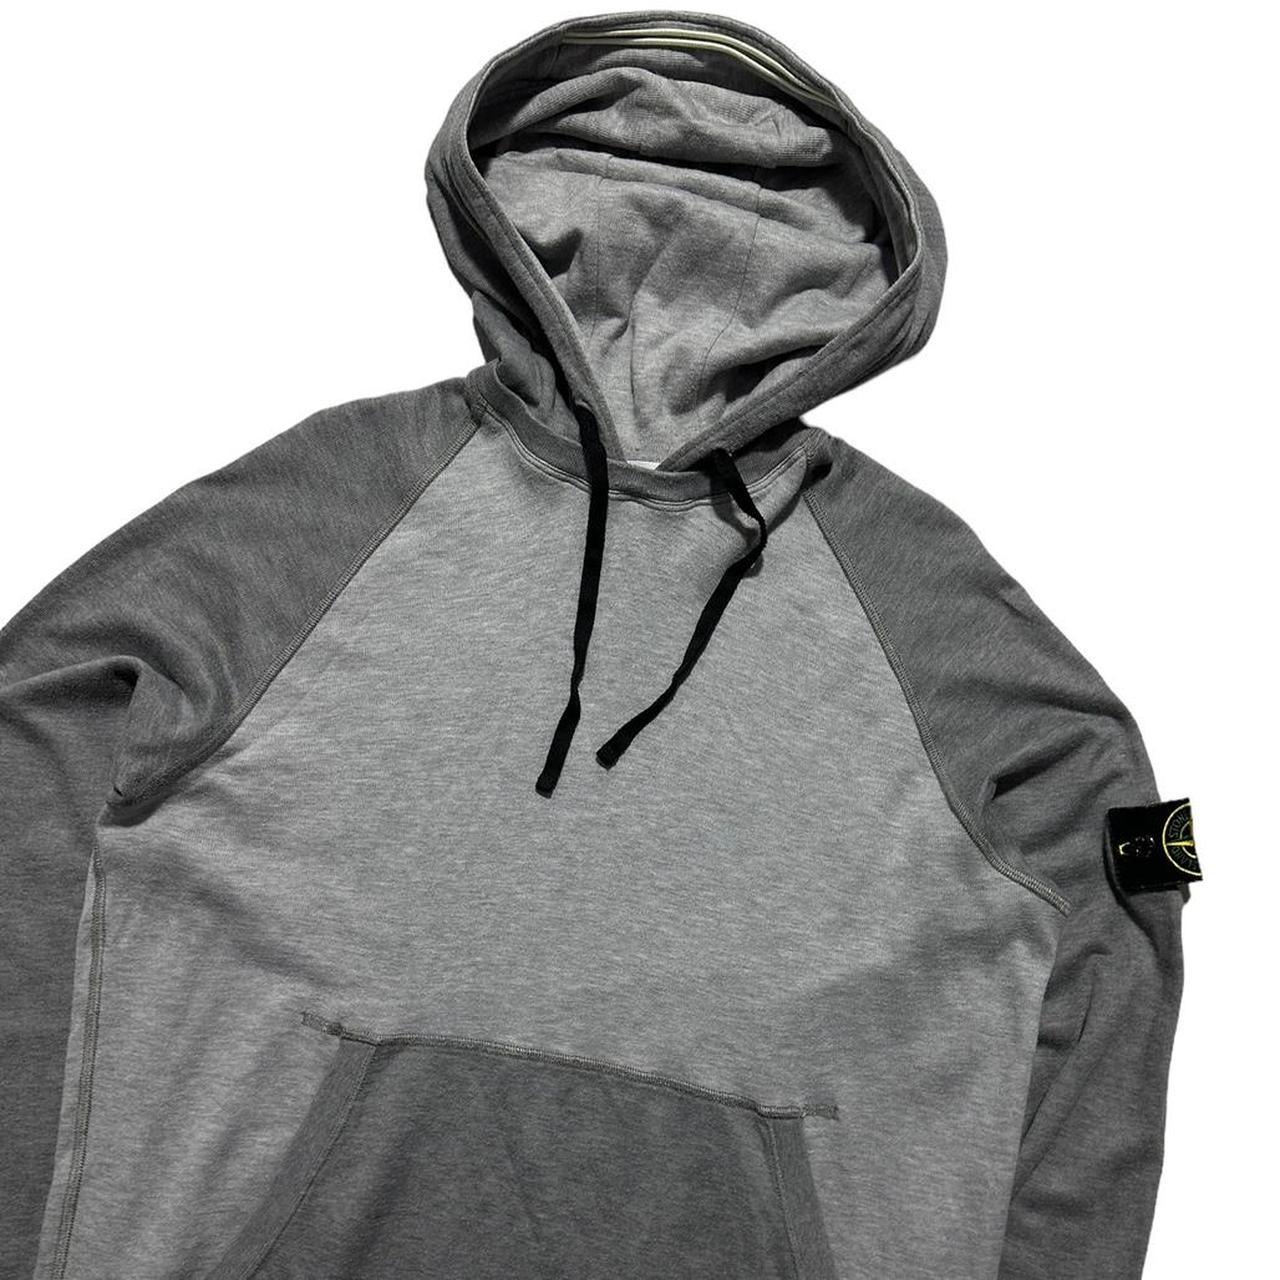 Stone Island Grey Pullover Hoodie - Known Source